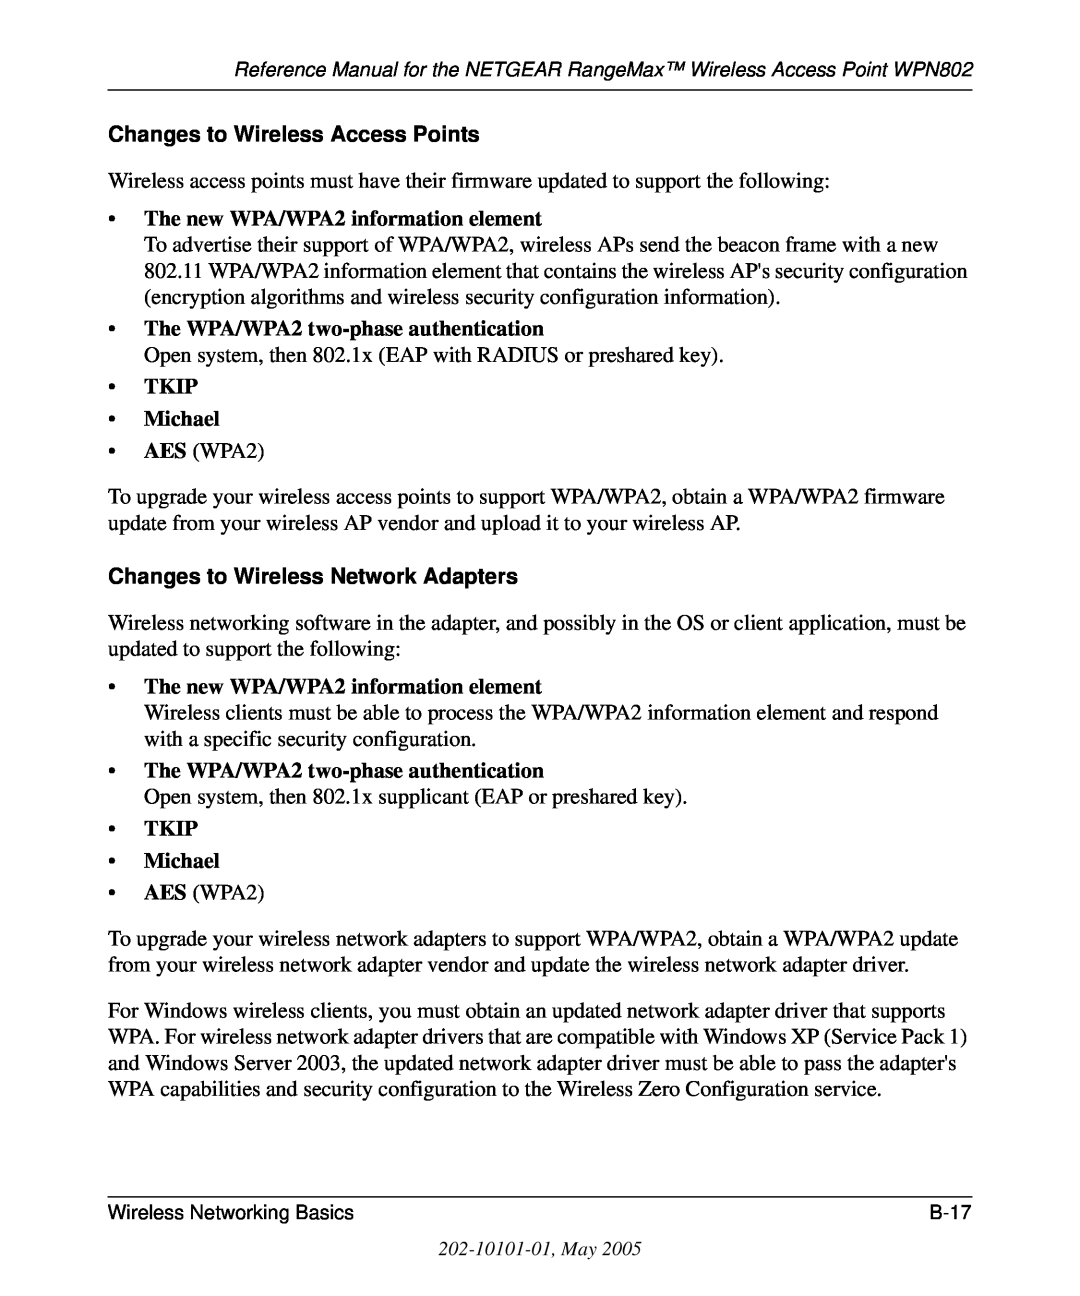 NETGEAR WPN802 manual Changes to Wireless Access Points, The new WPA/WPA2 information element, TKIP Michael 